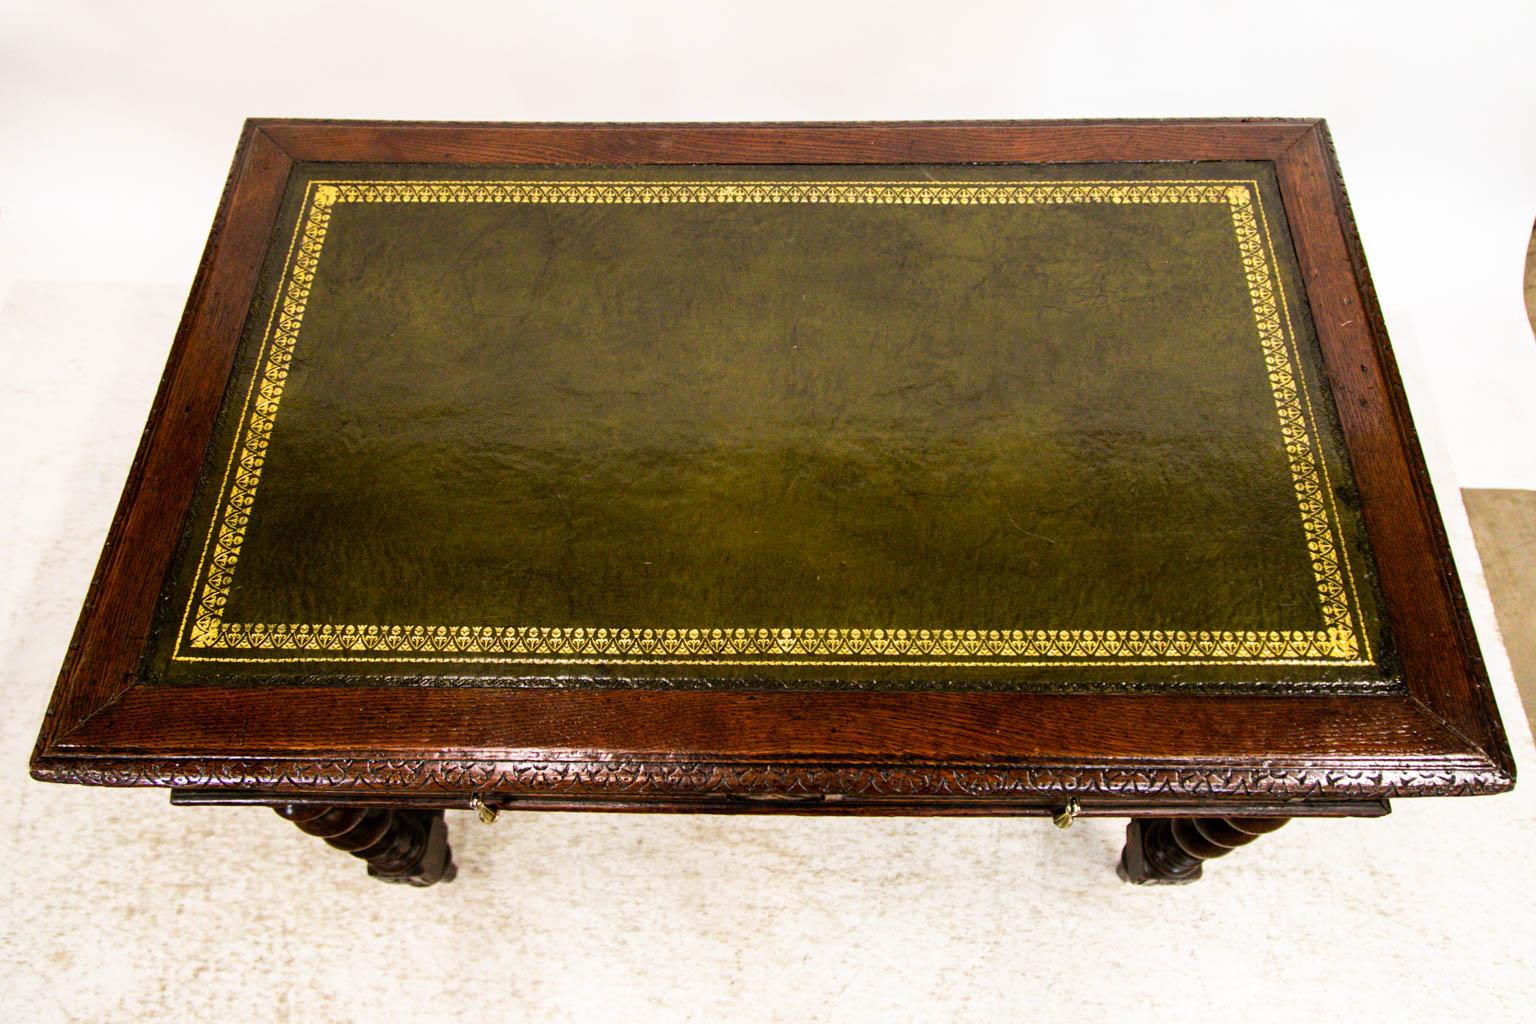 This English writing table is made of beautiful oakwood. The leather top is a deep olive with gold detailing around the edges. The top edge of this writing table is carved with stylized inverted arches.